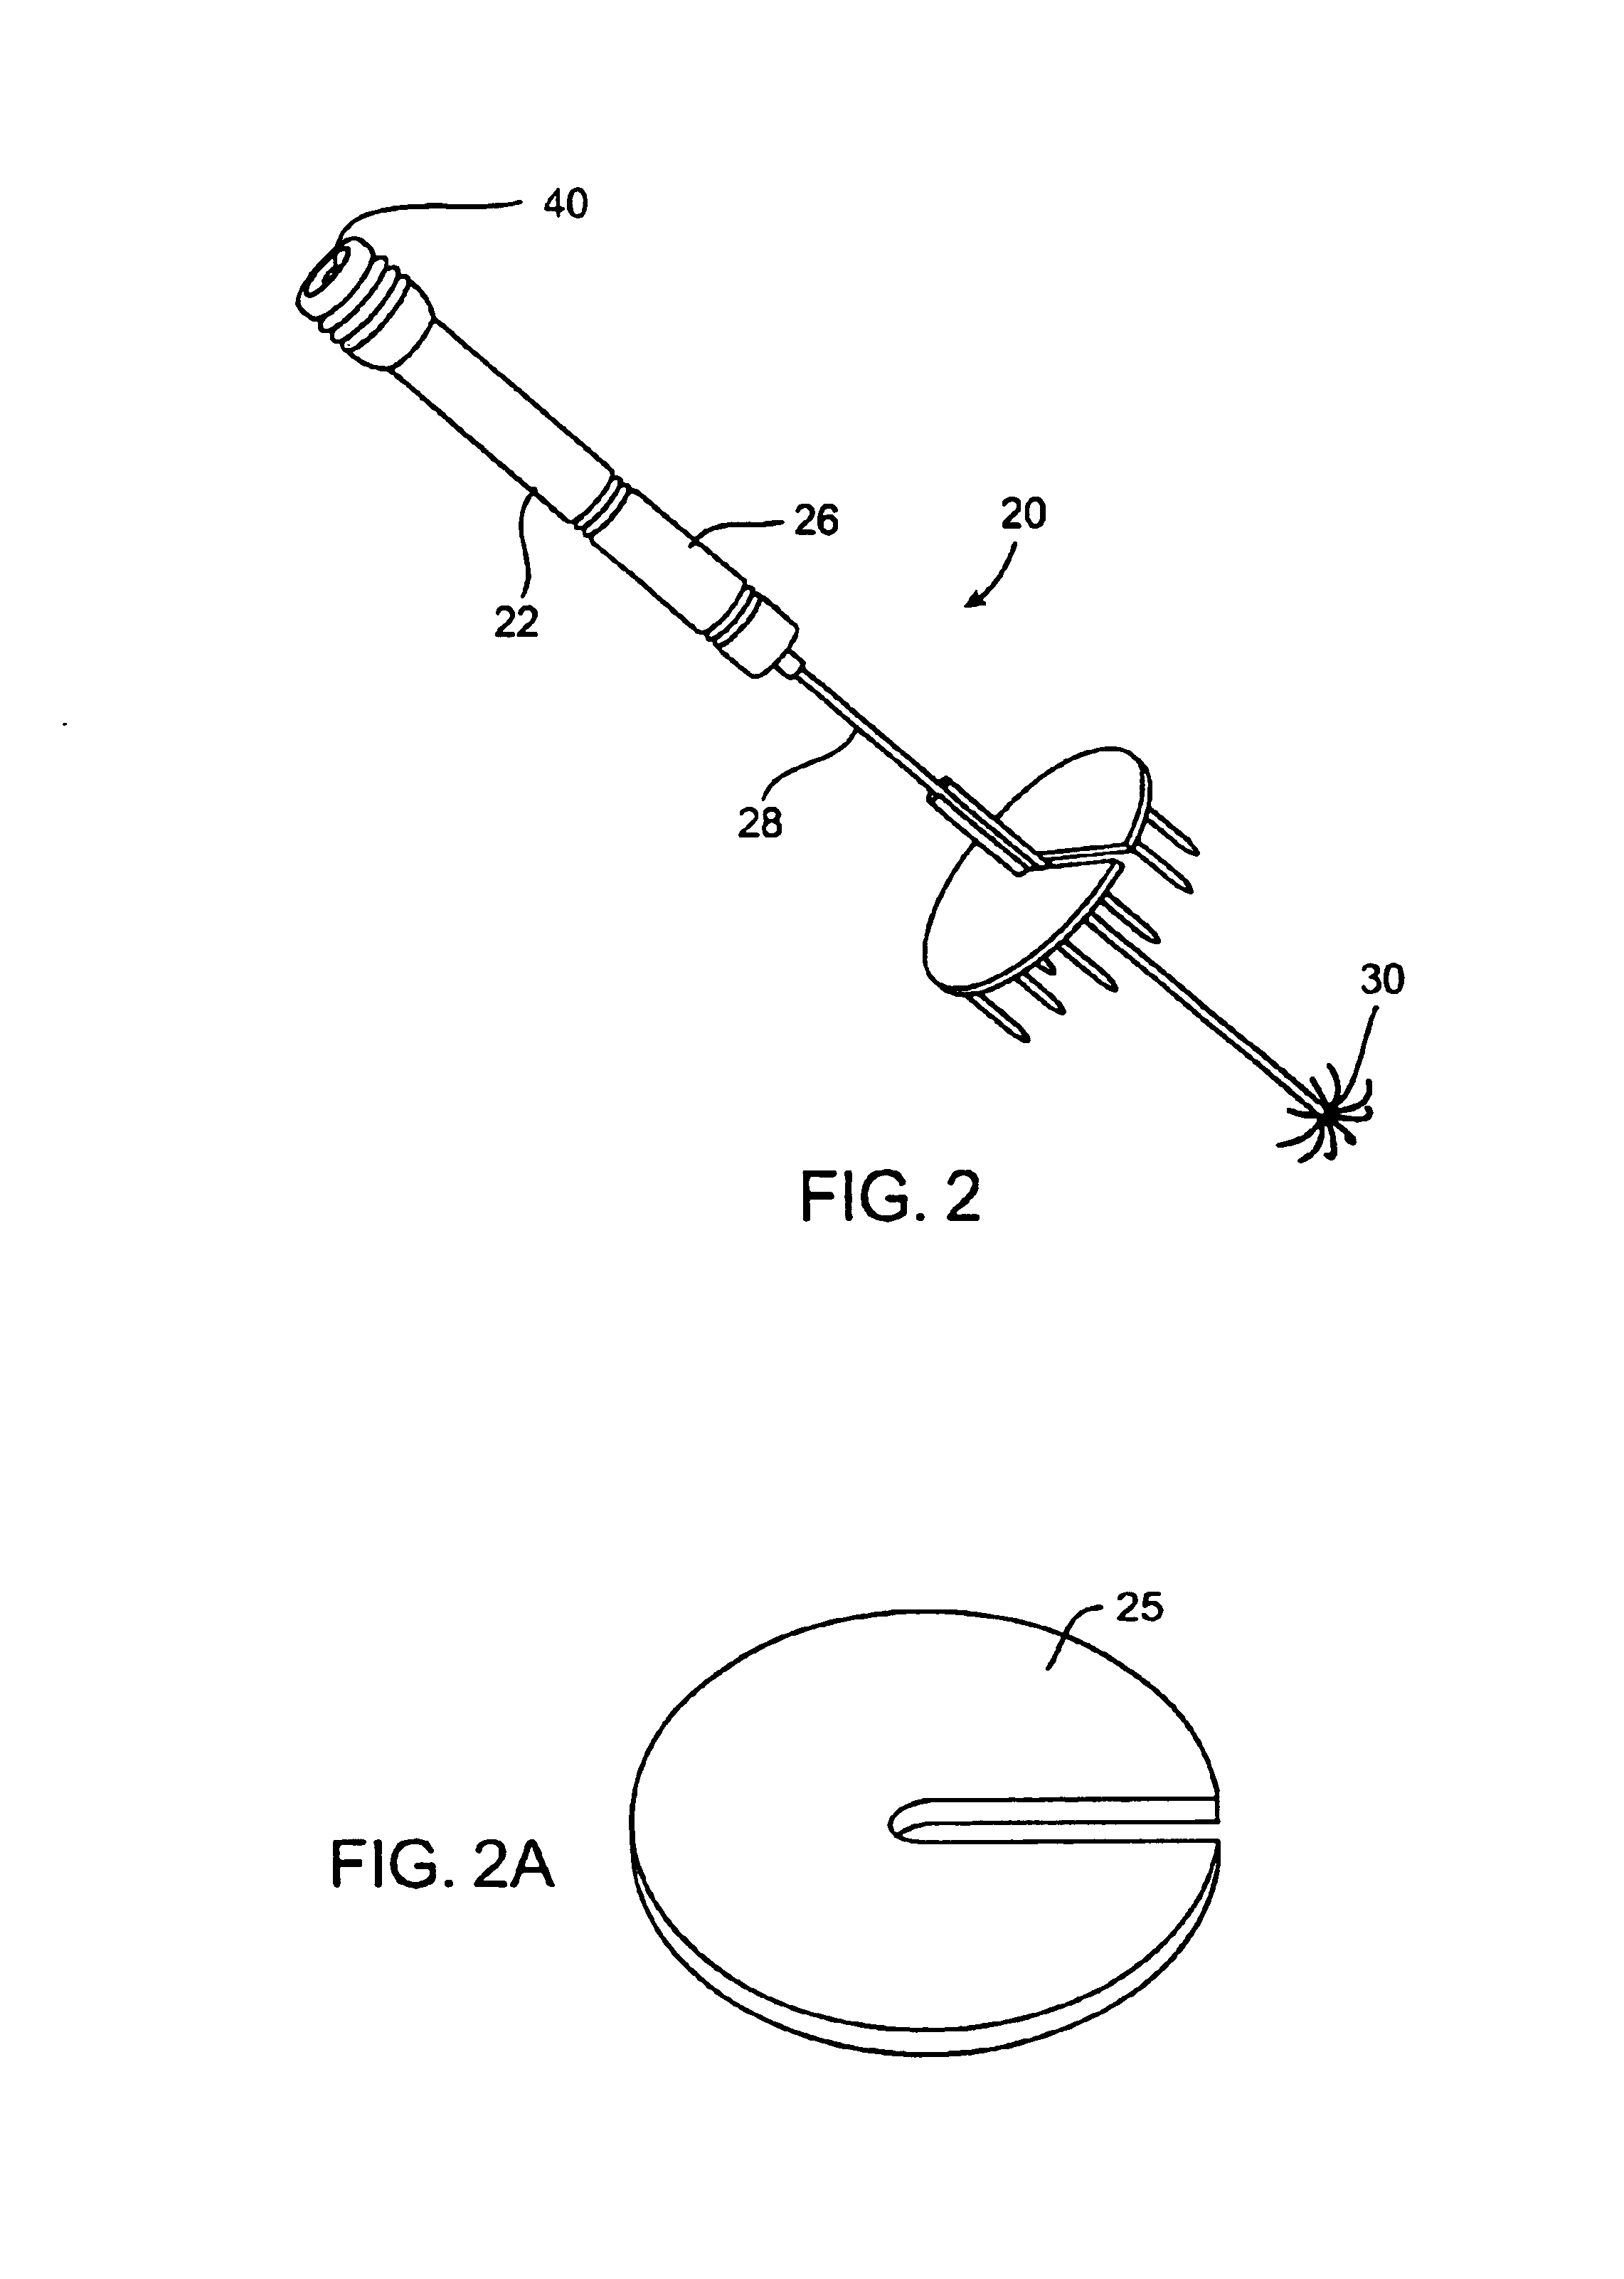 Apparatus and method for treating tumors near the surface of an organ